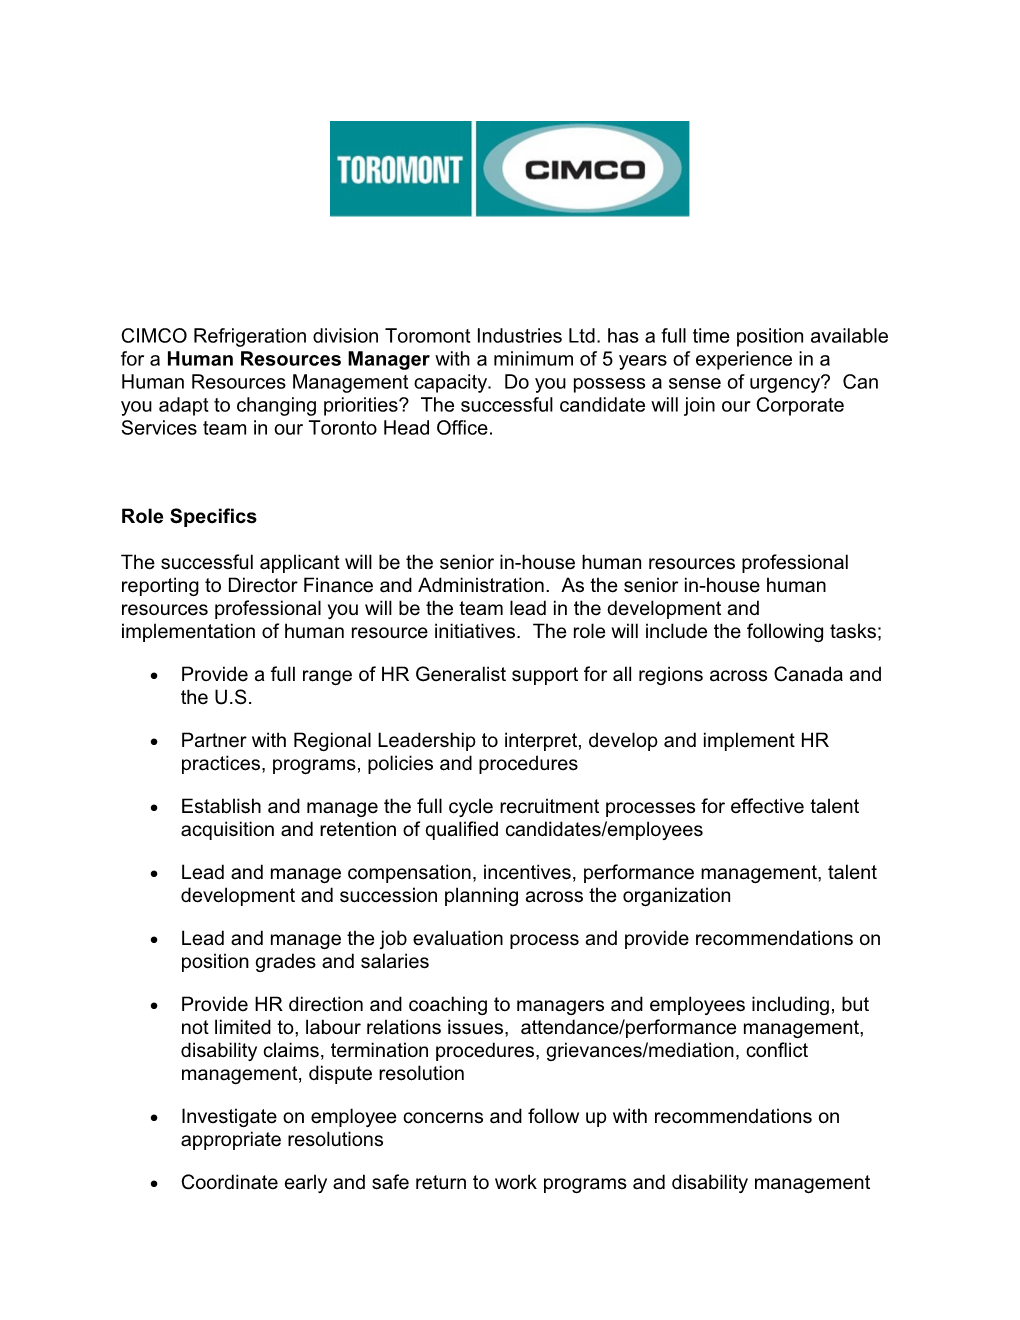 CIMCO Refrigeration Division Toromont Industries Ltd. Has a Full Time Position Available